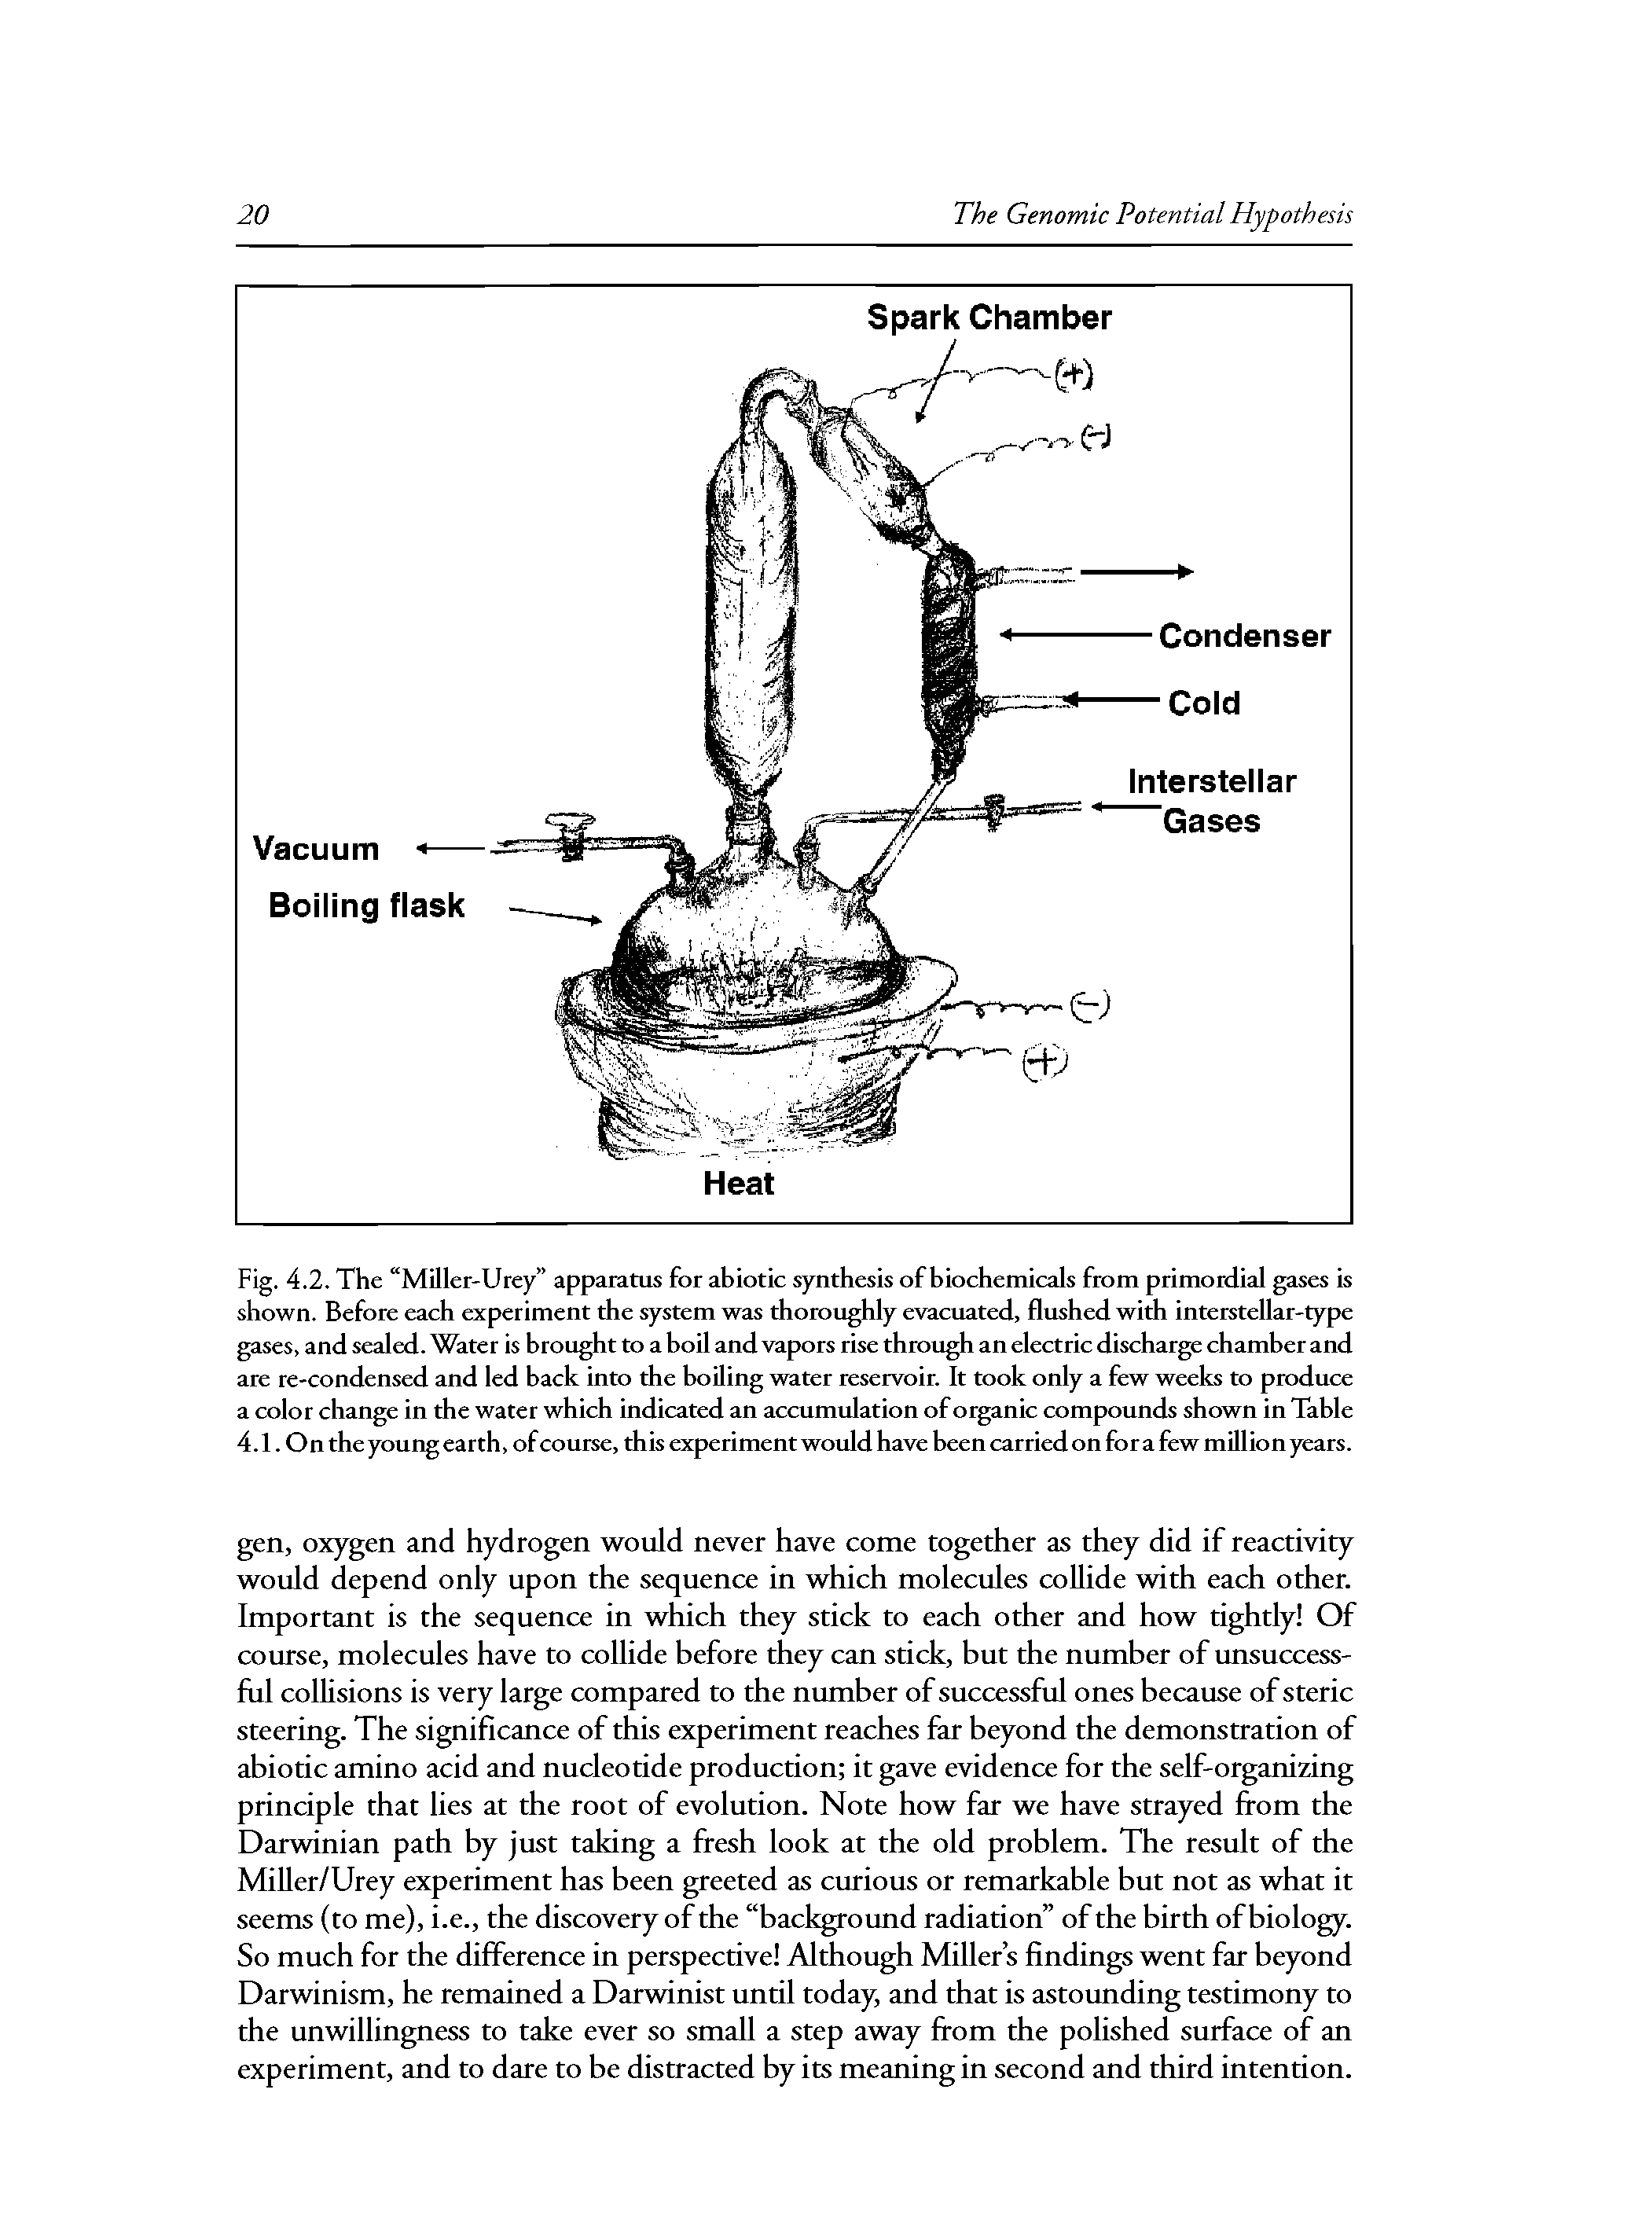 Fig. 4.2. The Miller-Urey apparatus for abiotic synthesis of biochemicals from primordial gases is shown. Before each experiment the system was thoroughly evacuated, flushed with interstellar-type gases, and sealed. Water is brought to a boil and vapors rise through an electric discharge chamber and are re-condensed and led back into the boiling water reservoir. It took only a few weeks to produce a color change in the water which indicated an accumulation of organic compounds shown in Table 4.1. On the young earth, of course, this experiment would have been carried on for a few million years.